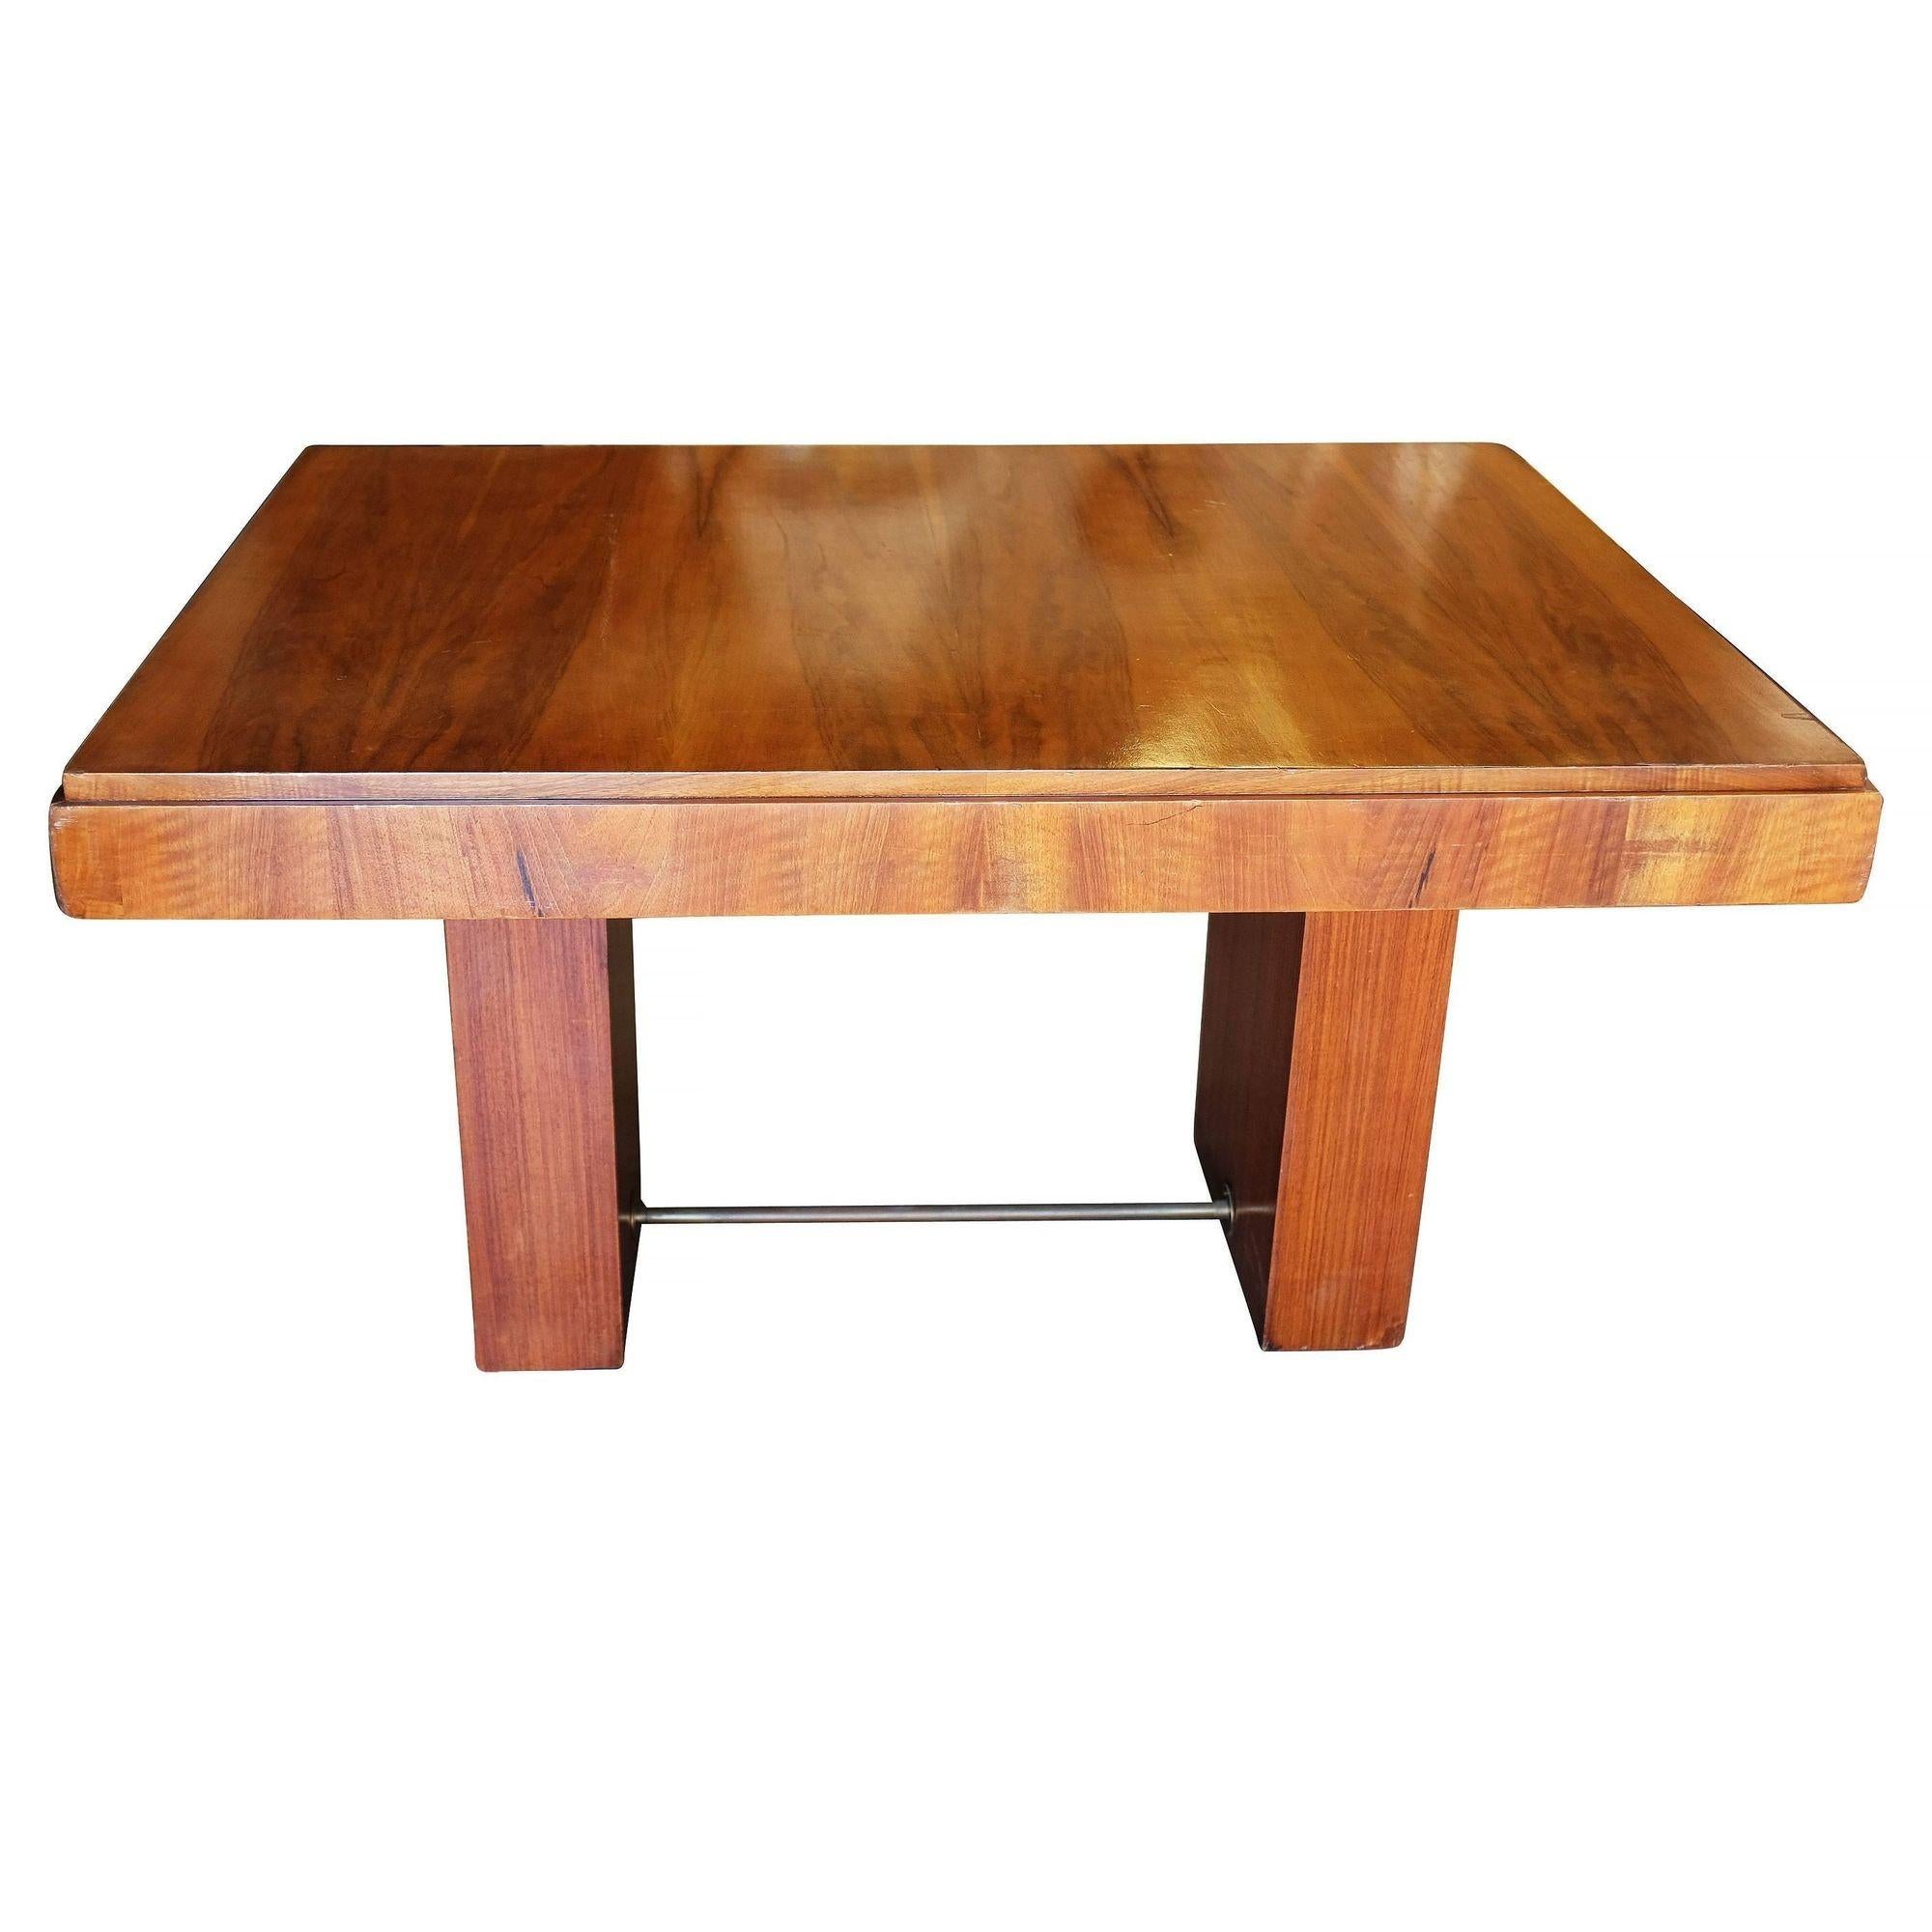 Cubist inspired walnut desk in the fashion of designers like Charles Dudouyt with cheery stained hardwood veneer, two-tier stepped top and sharp squared legs. 